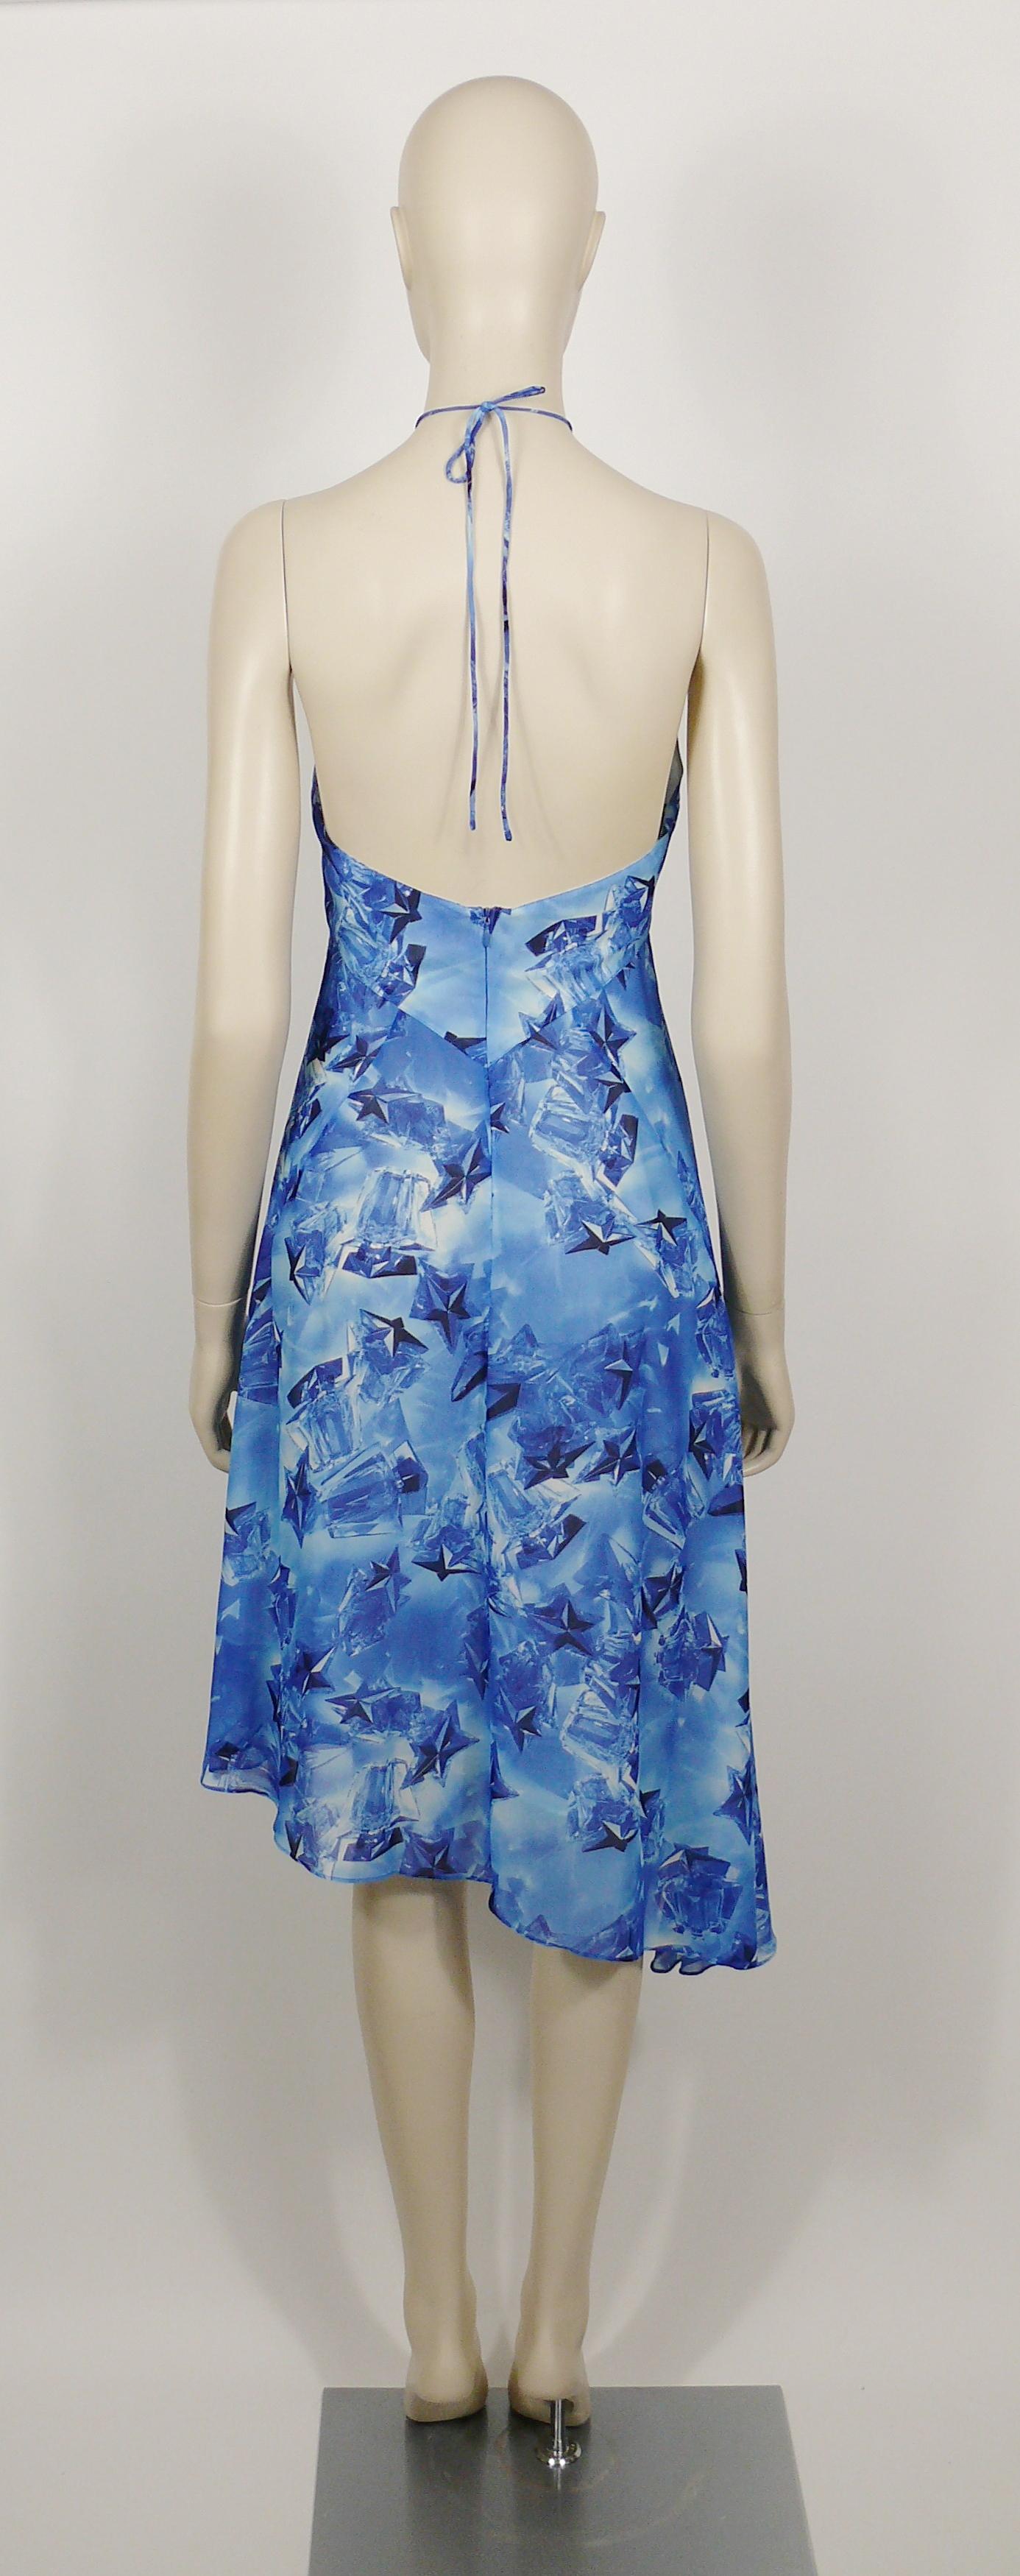 Thierry Mugler Couture Vintage Iconic Angel Flacon Print Asymetric Halter Dress For Sale 1